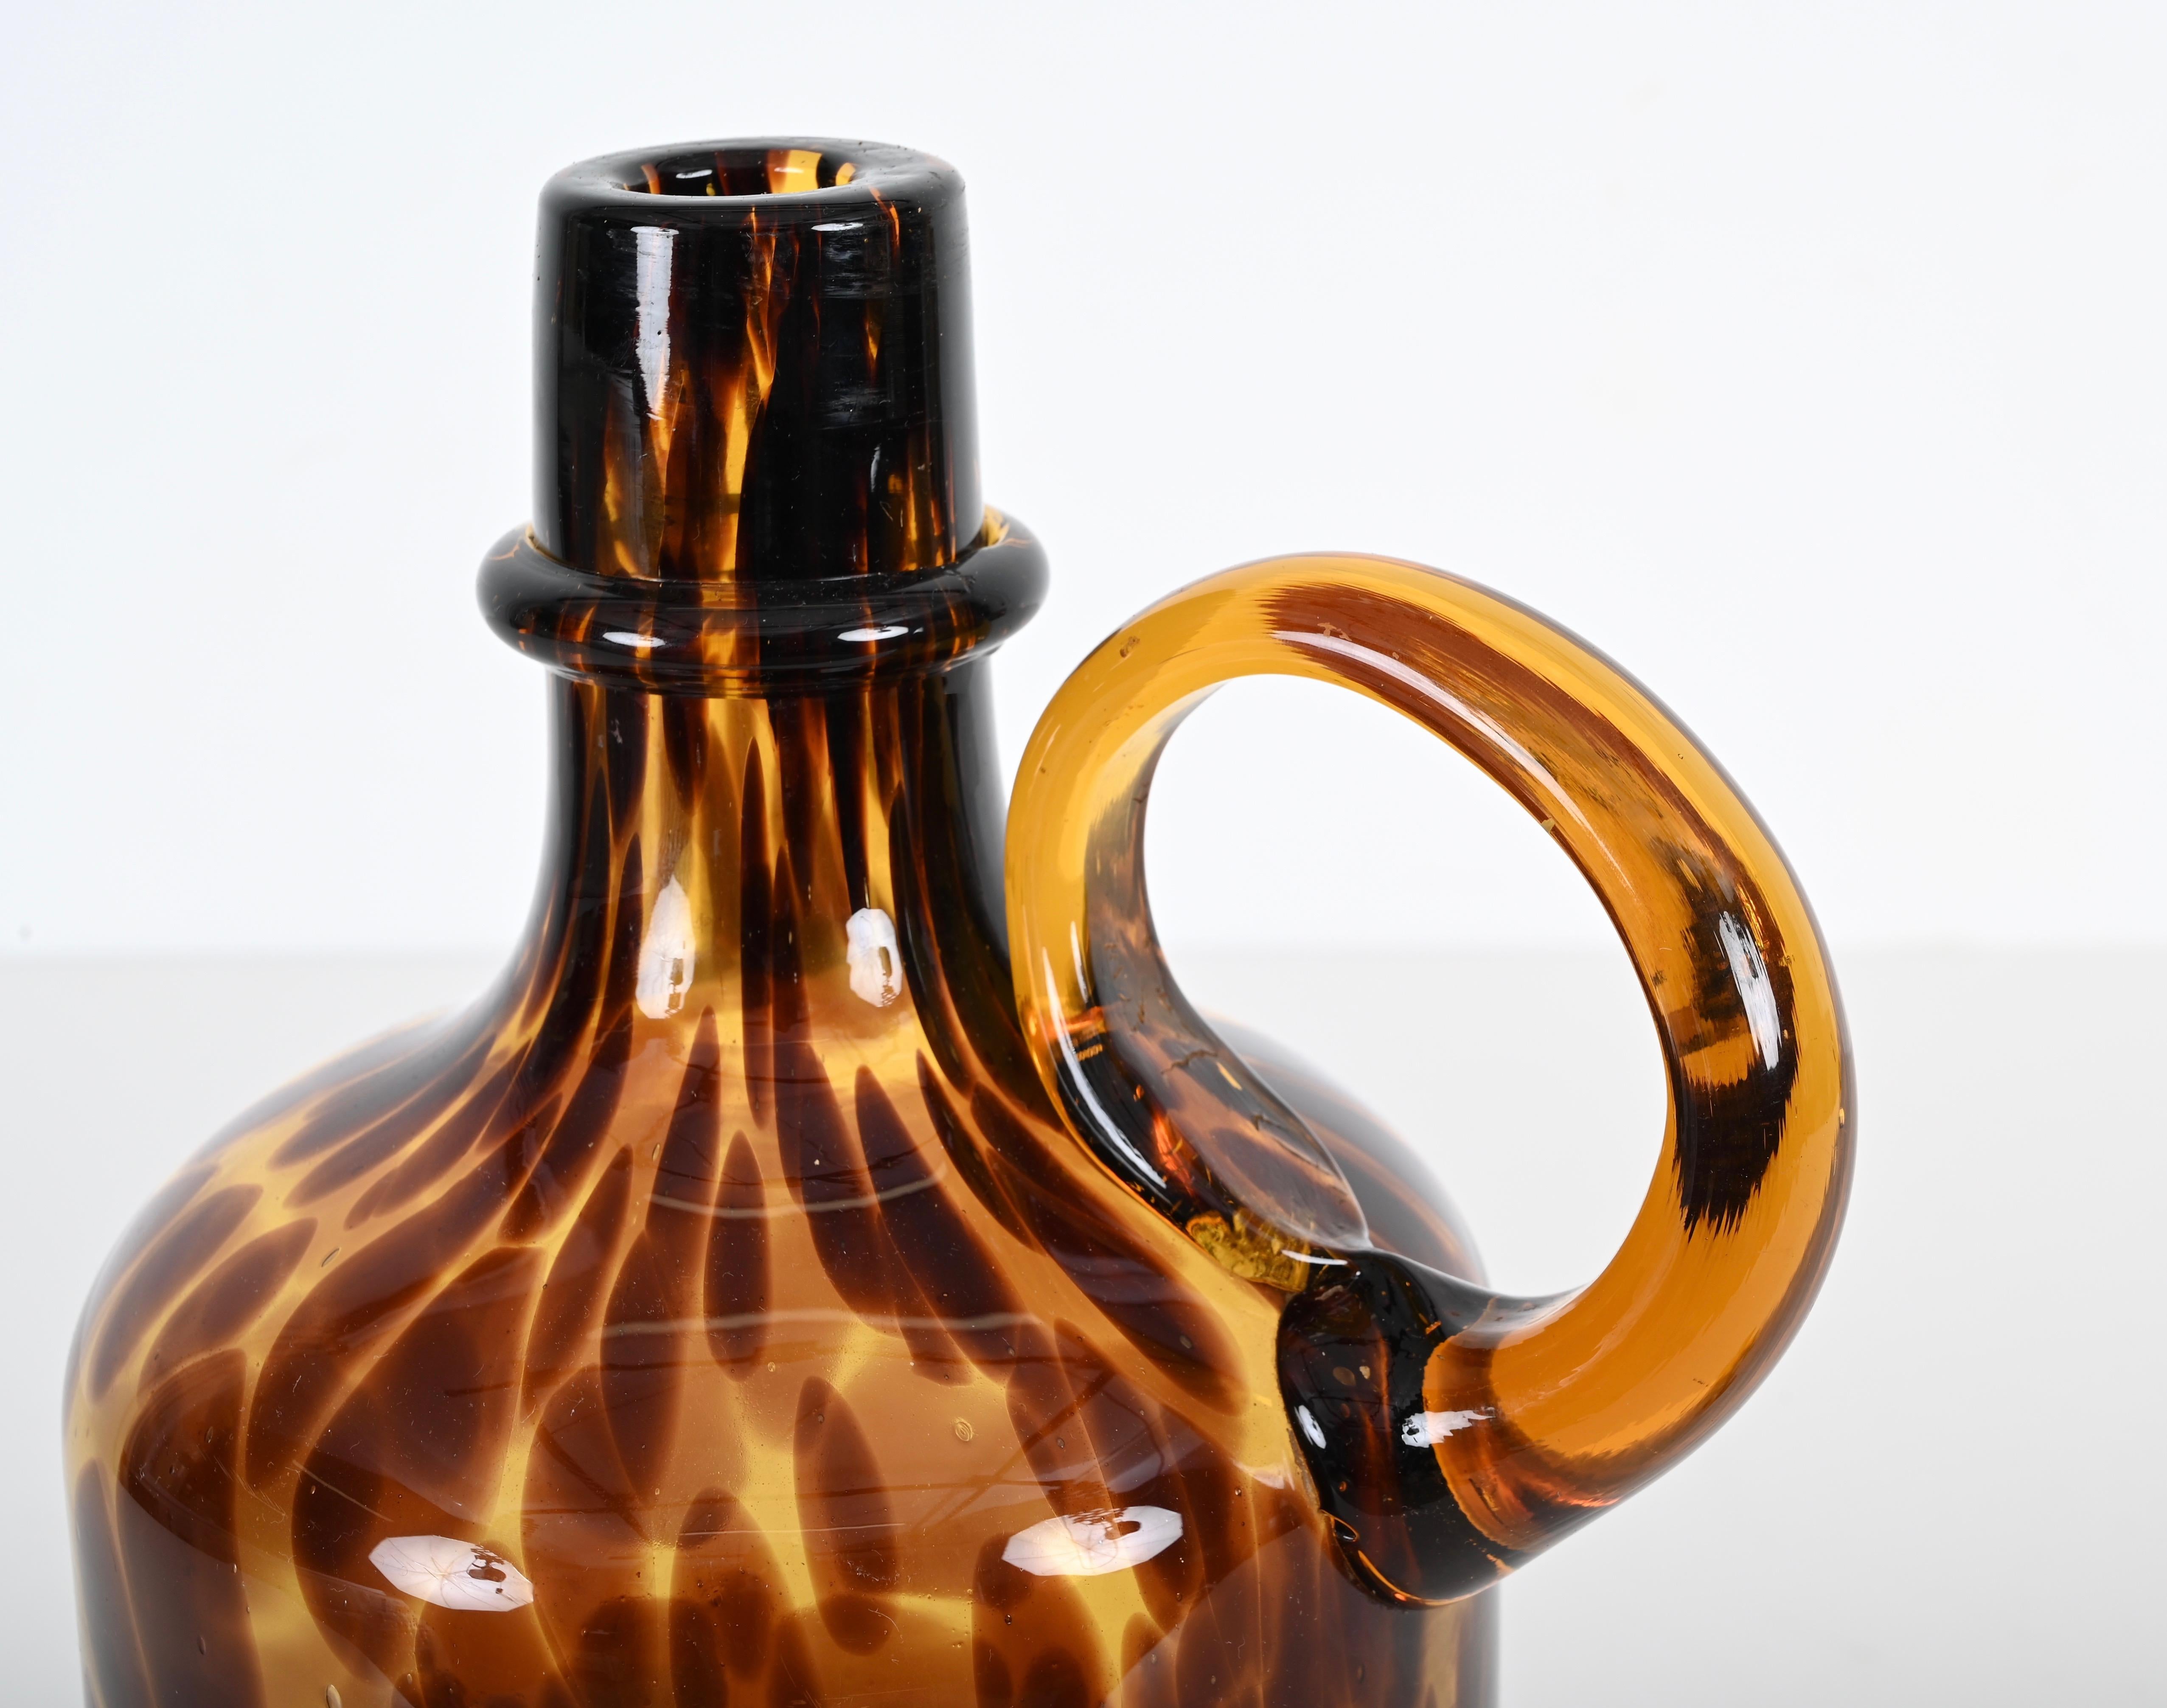 Leopard Murano Art Glass Decorative Pitcher with Brass Cap, Italy 1970s For Sale 7